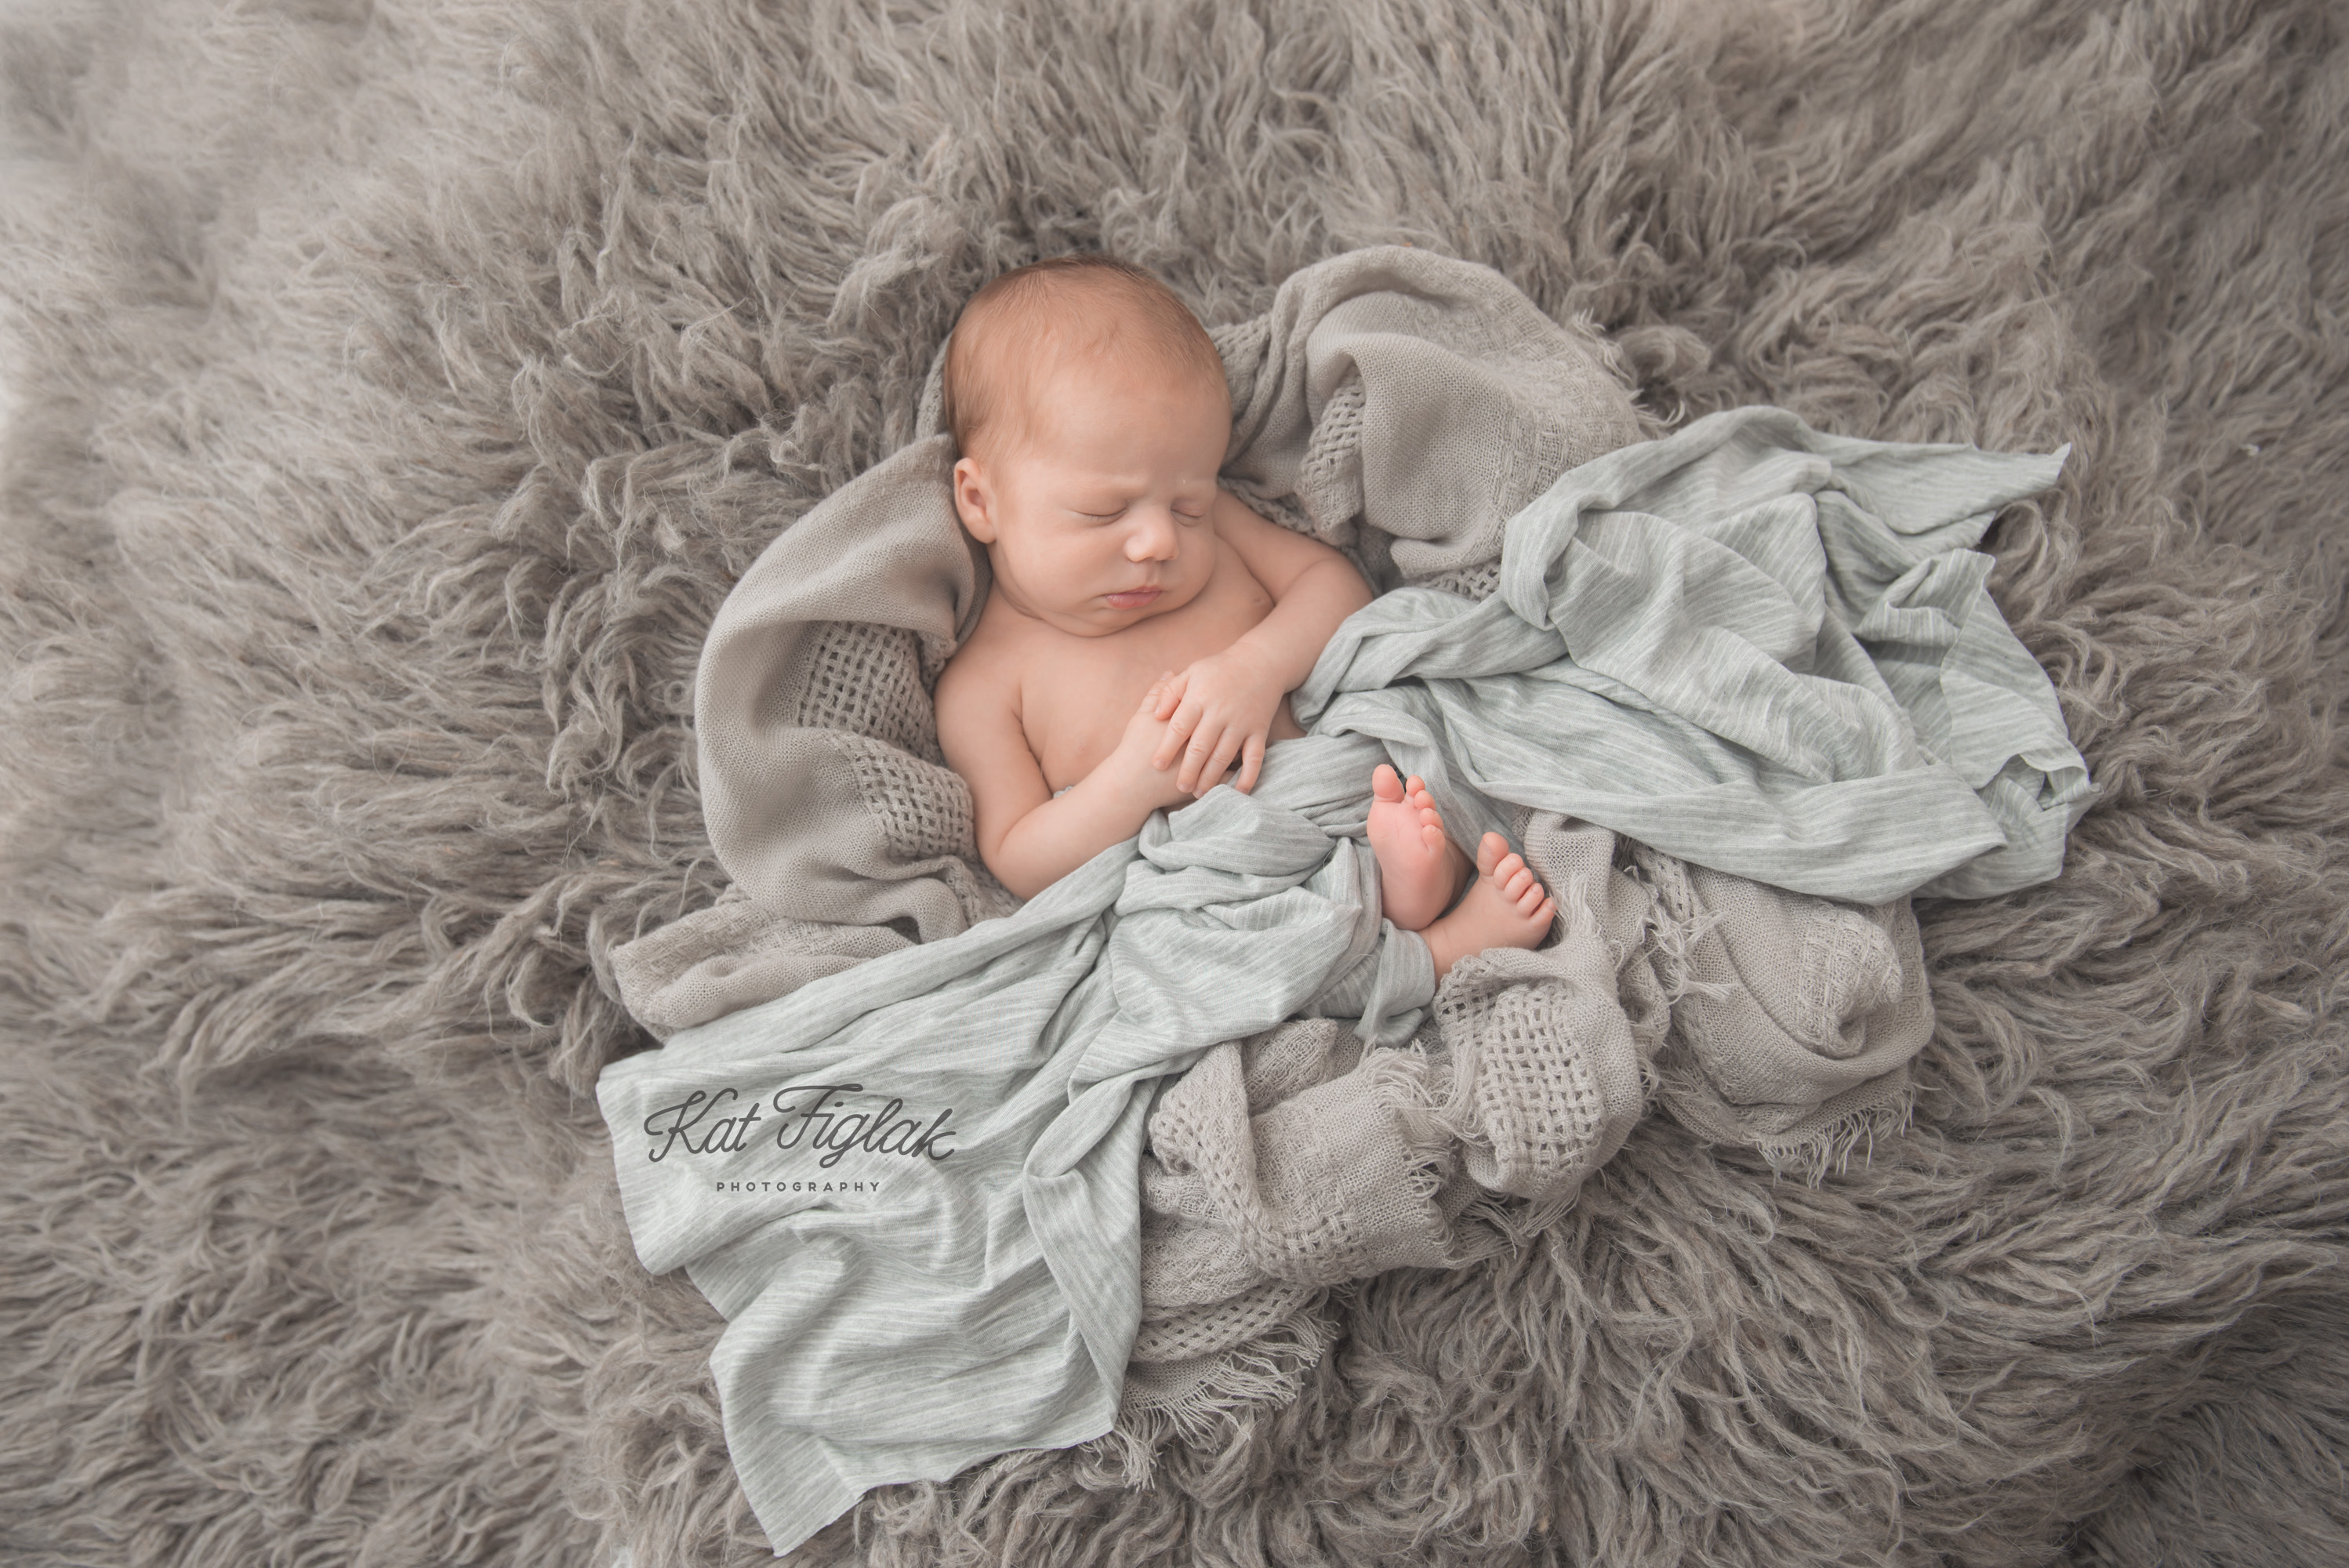 Newborn baby boy snuggled sleeping in gray blankets, knits and furs wrapped in light blue wrap